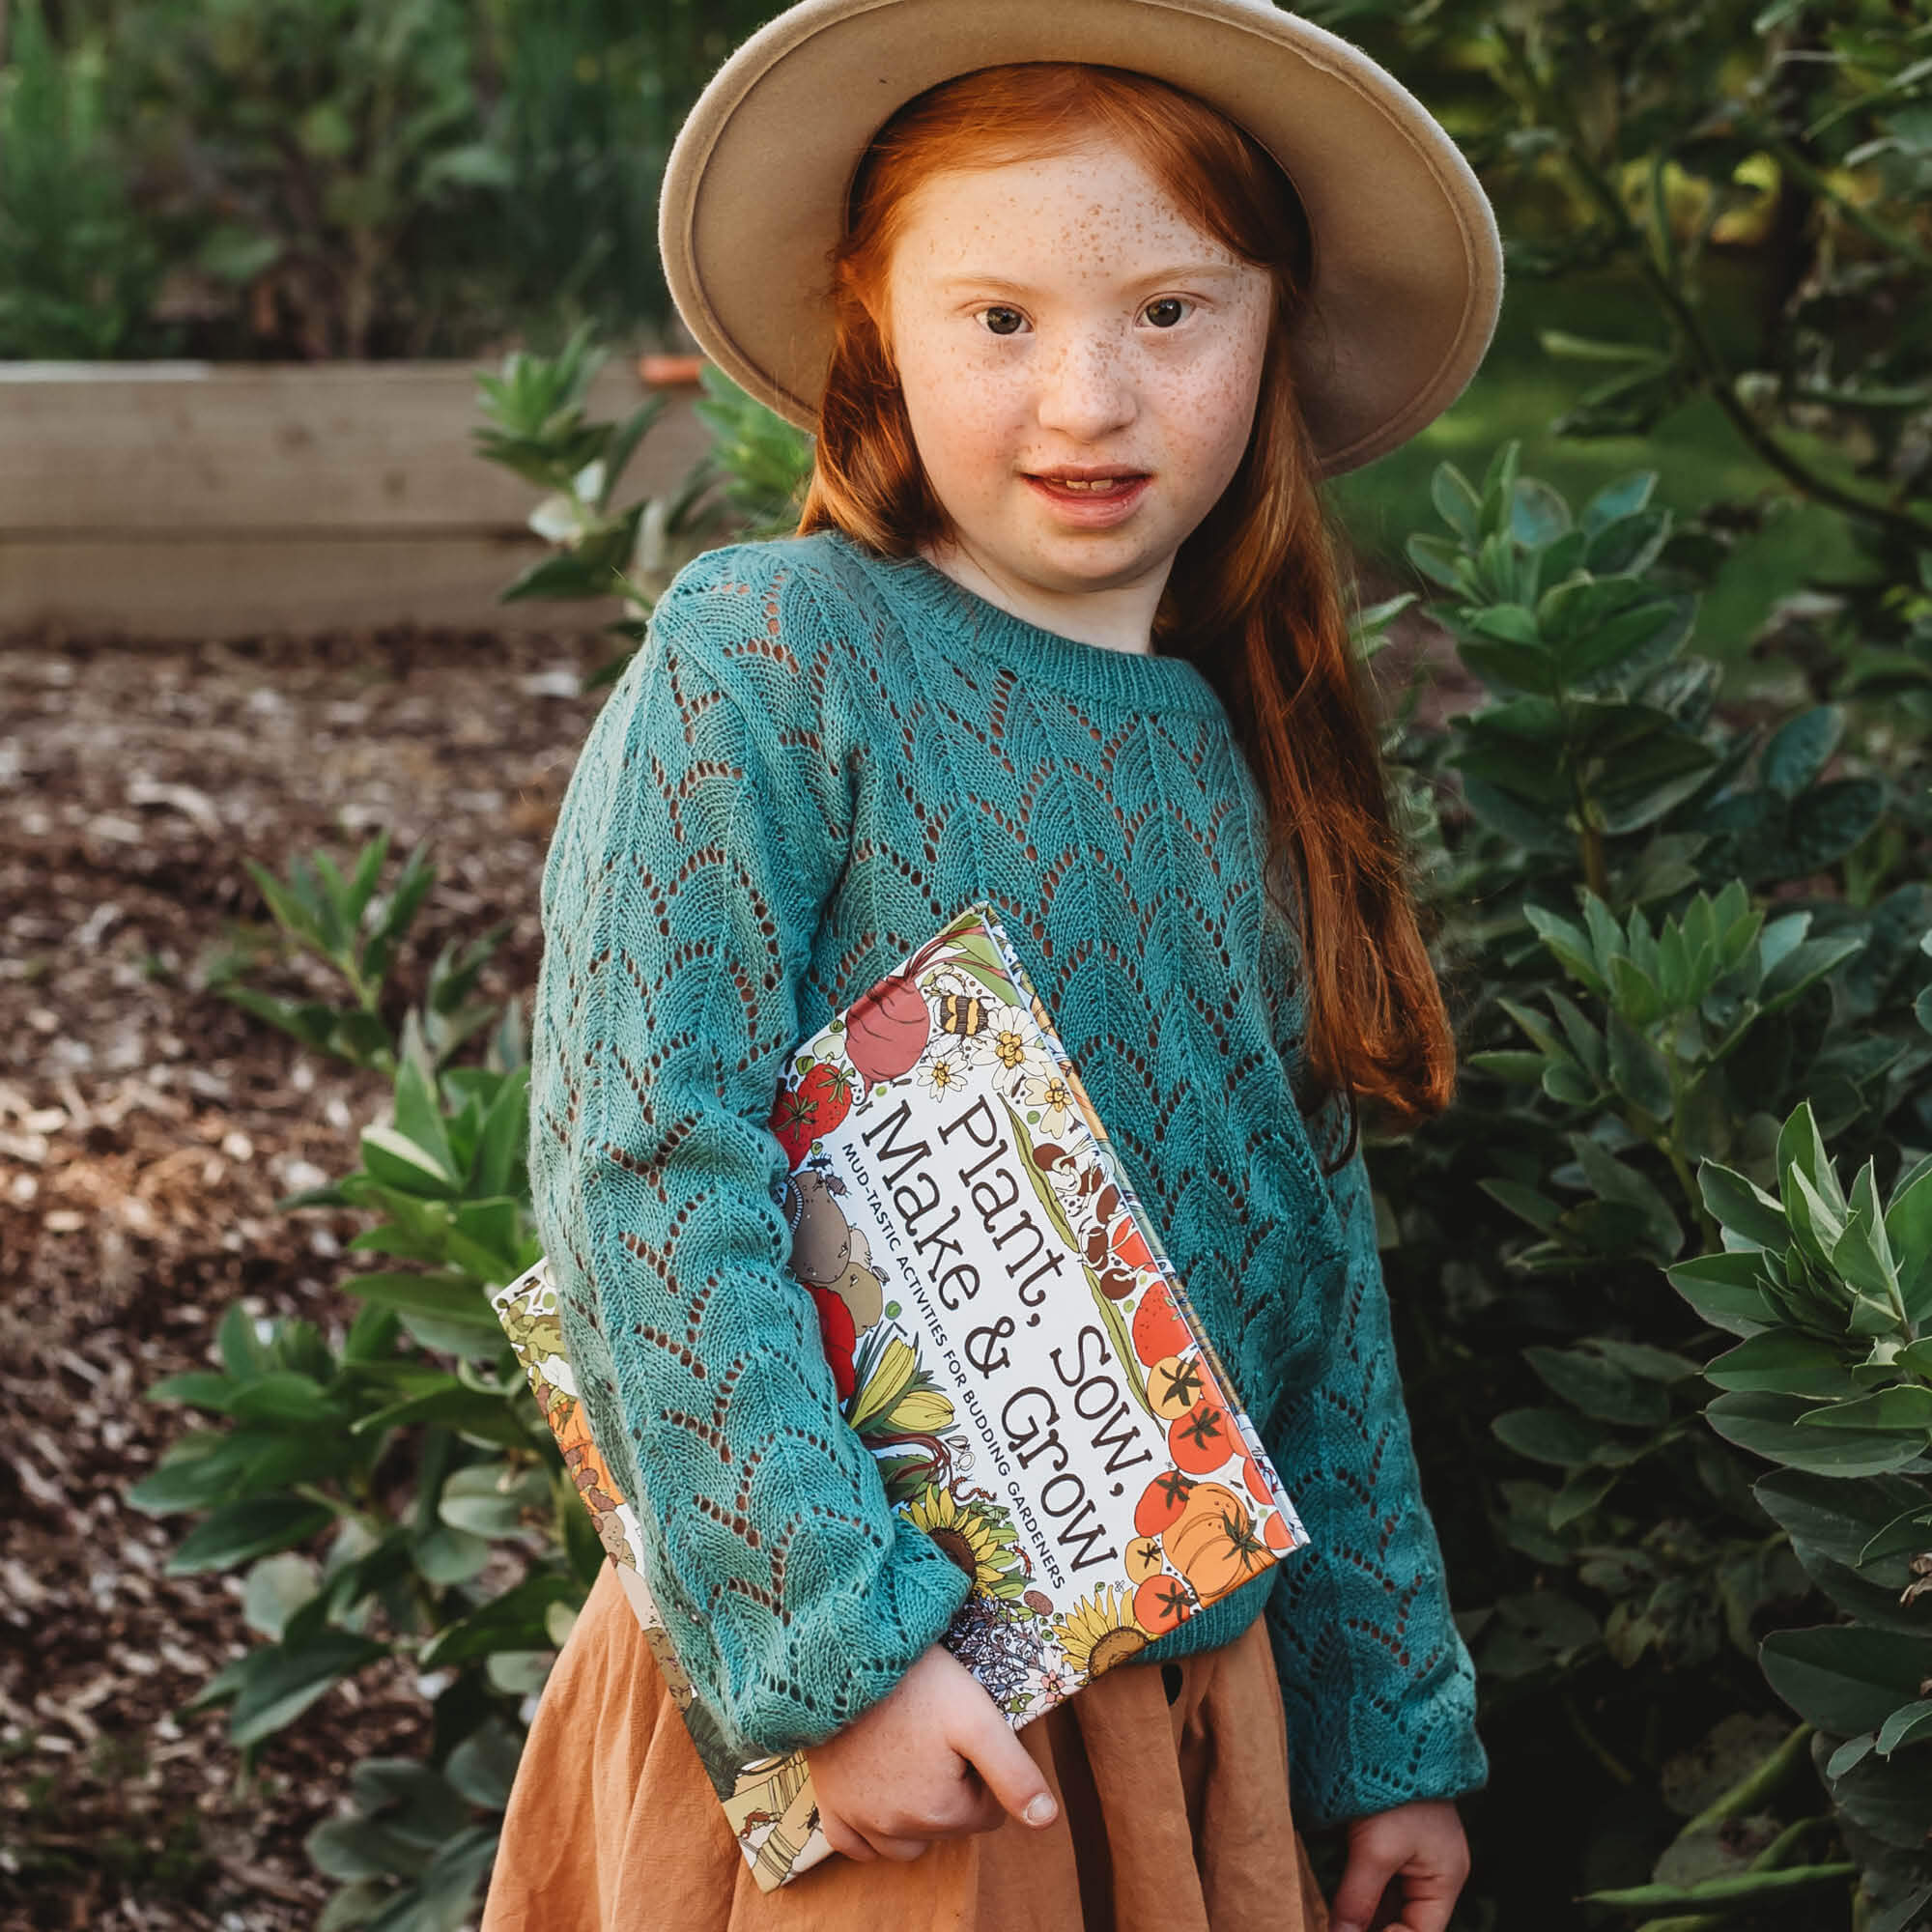 Girl holding Plant, Sow, Make and Grow kids gardening book by Esther Coombs from Your Wild Books.